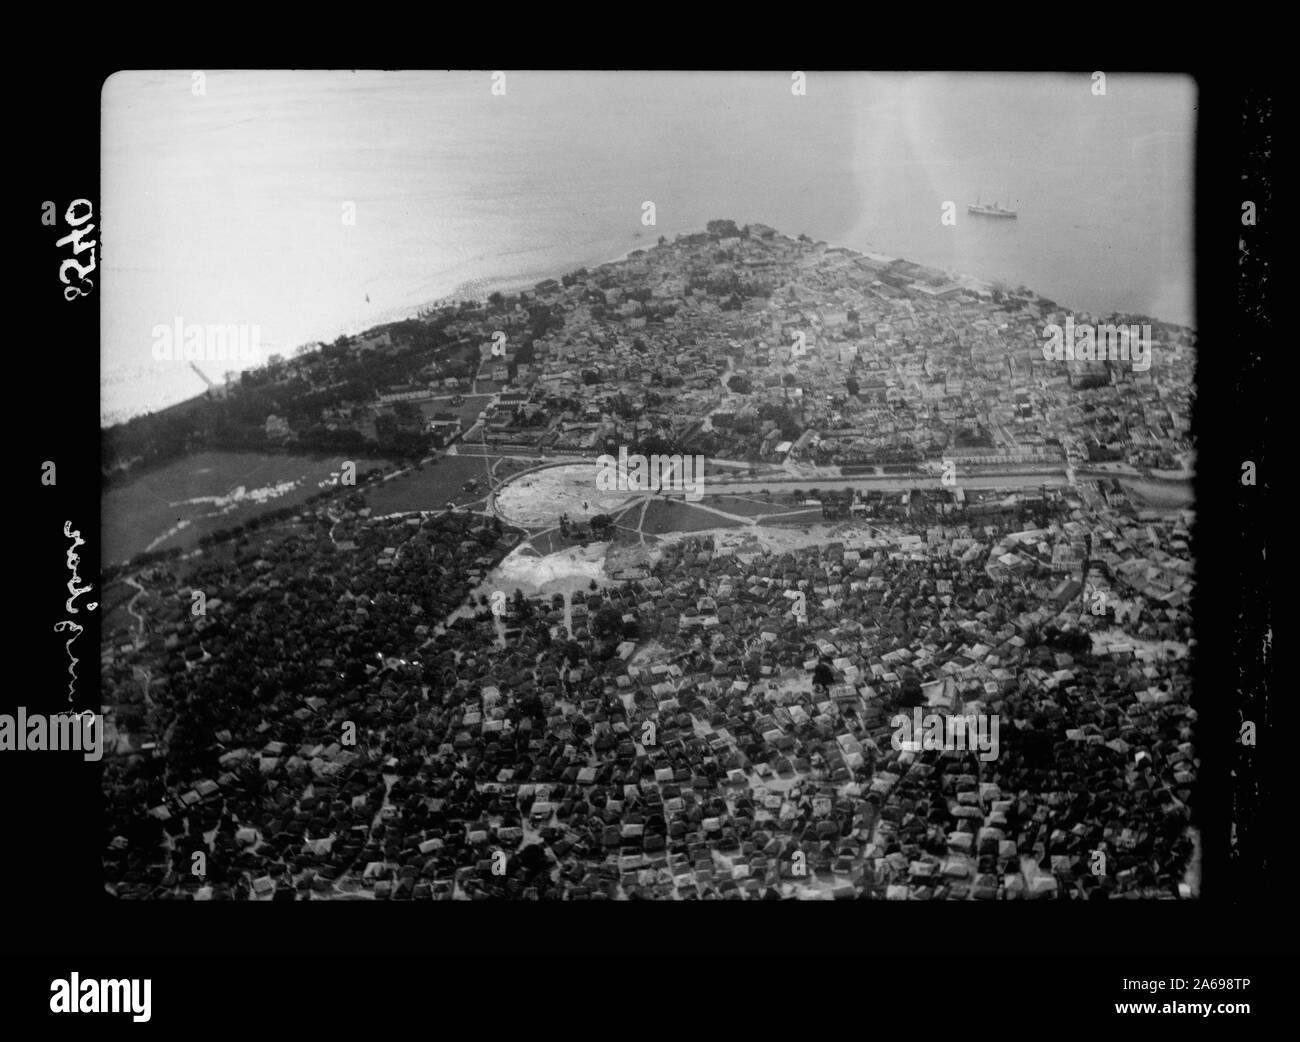 Zanzibar. Air view looking down on central part of city Stock Photo